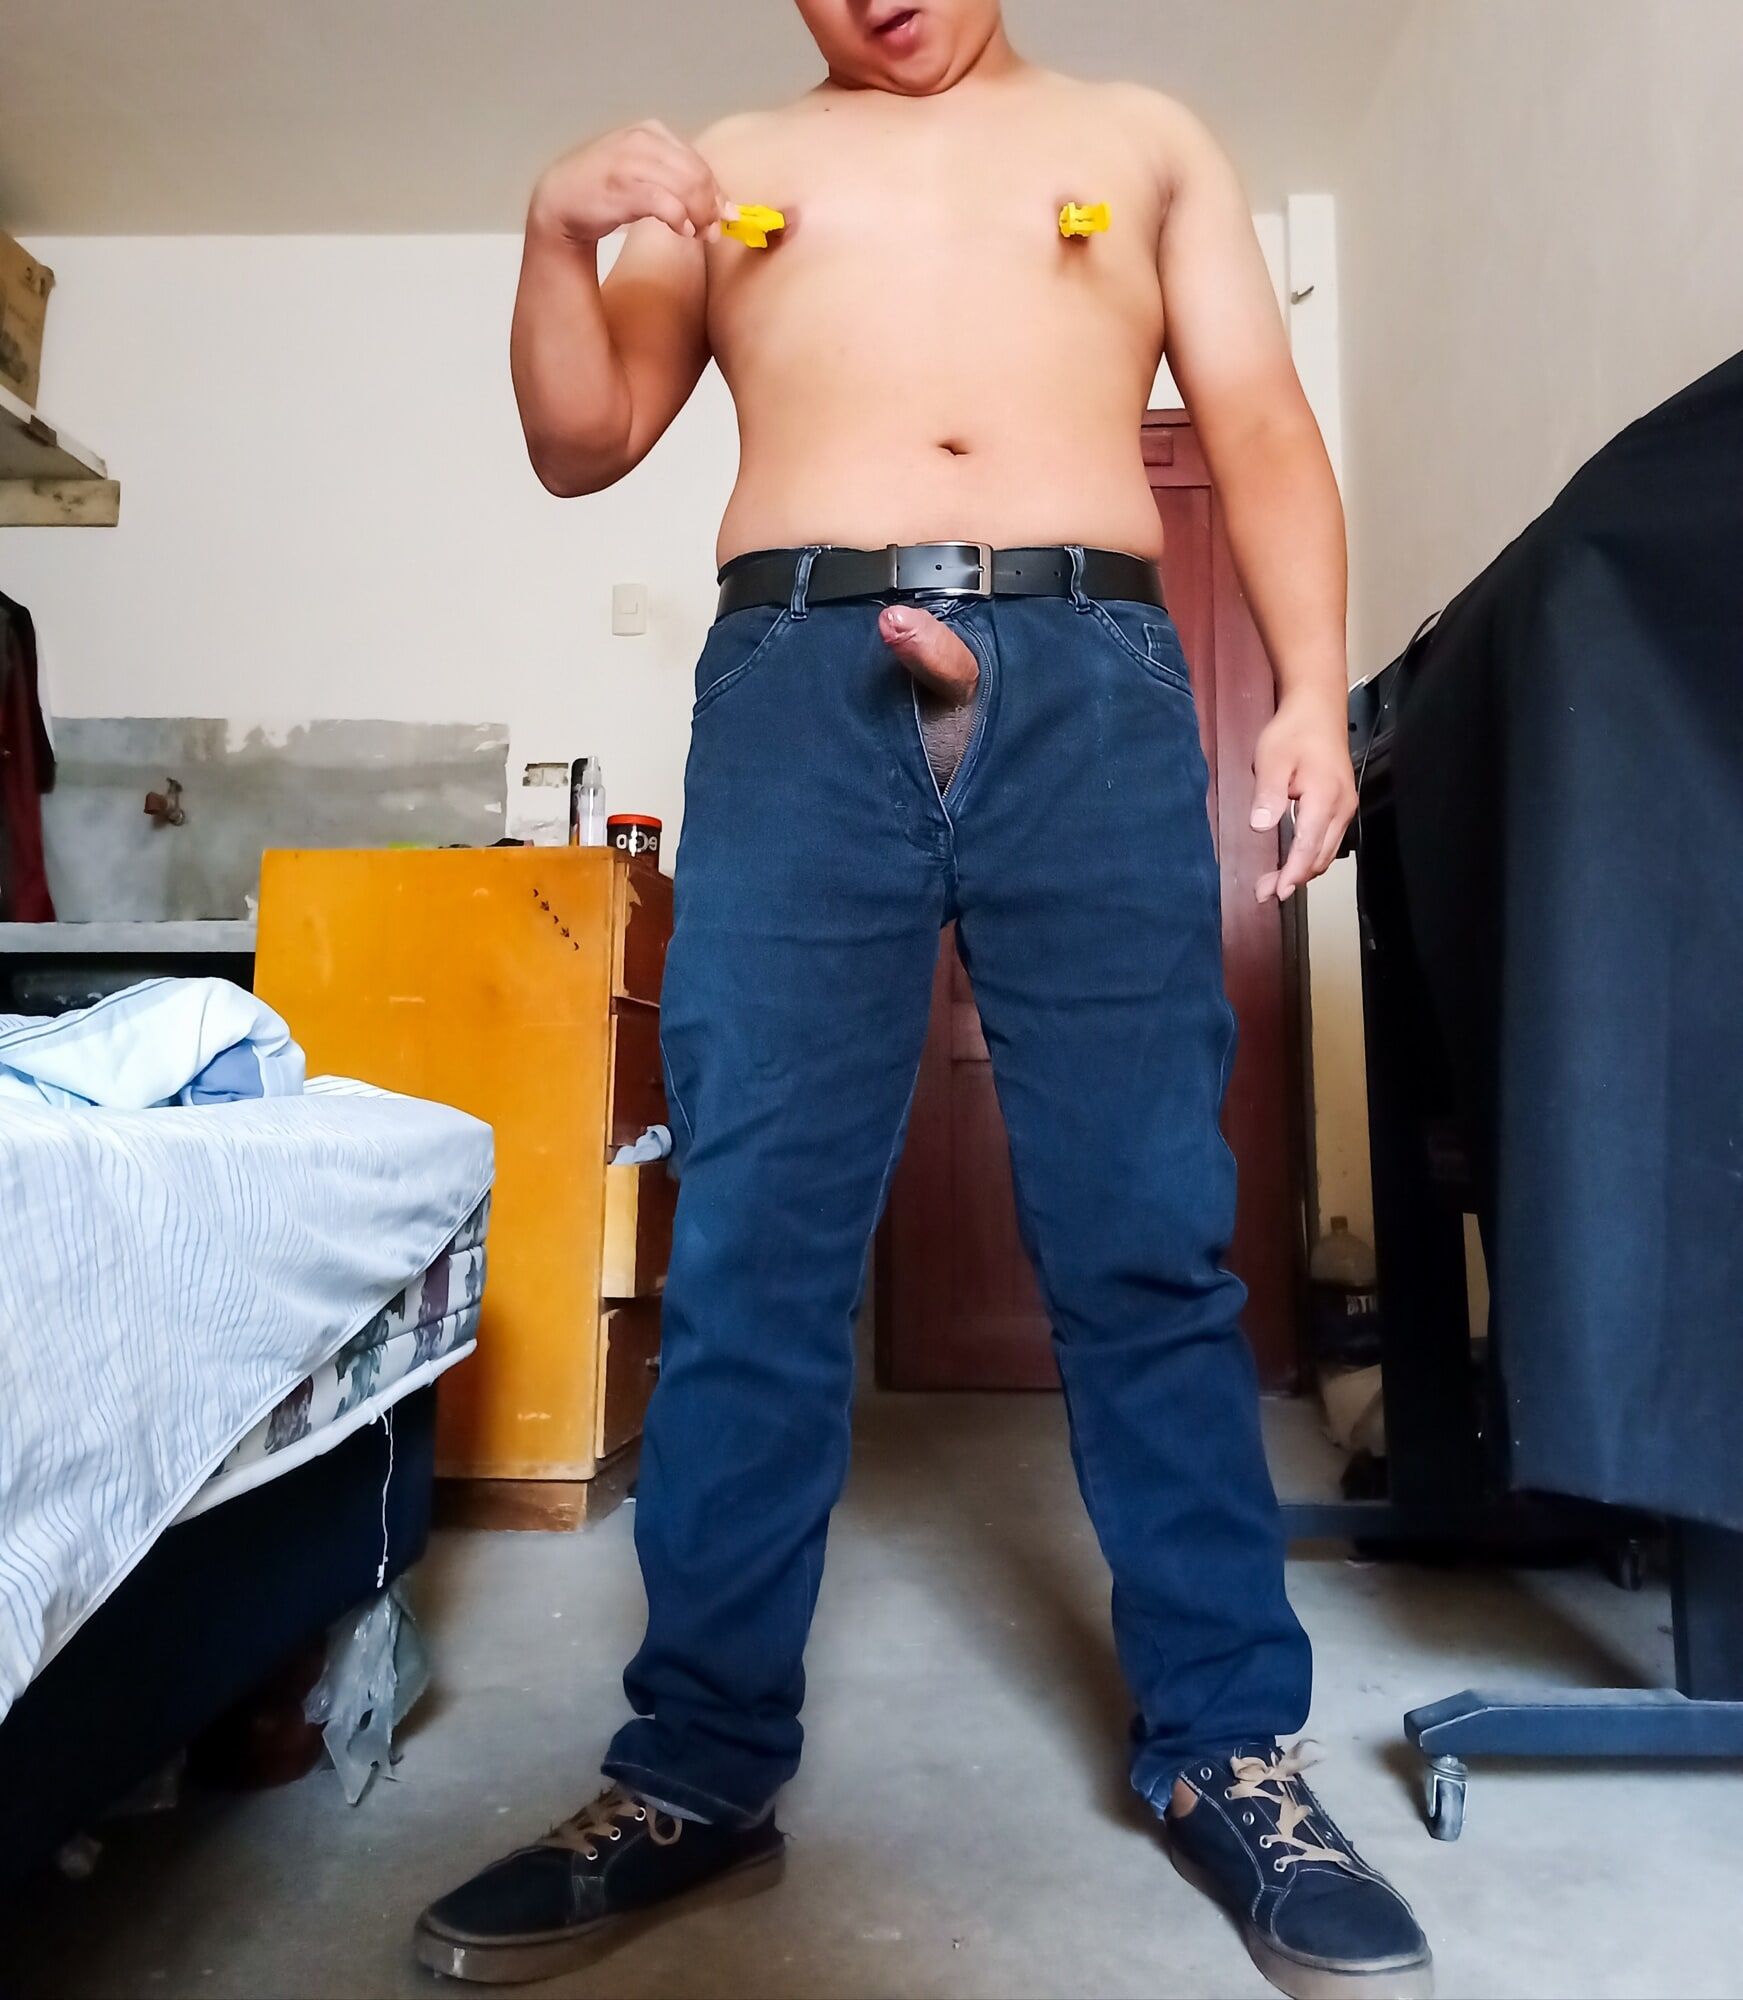 Torturing the Nipples and Playing with my rich cock 01 #23